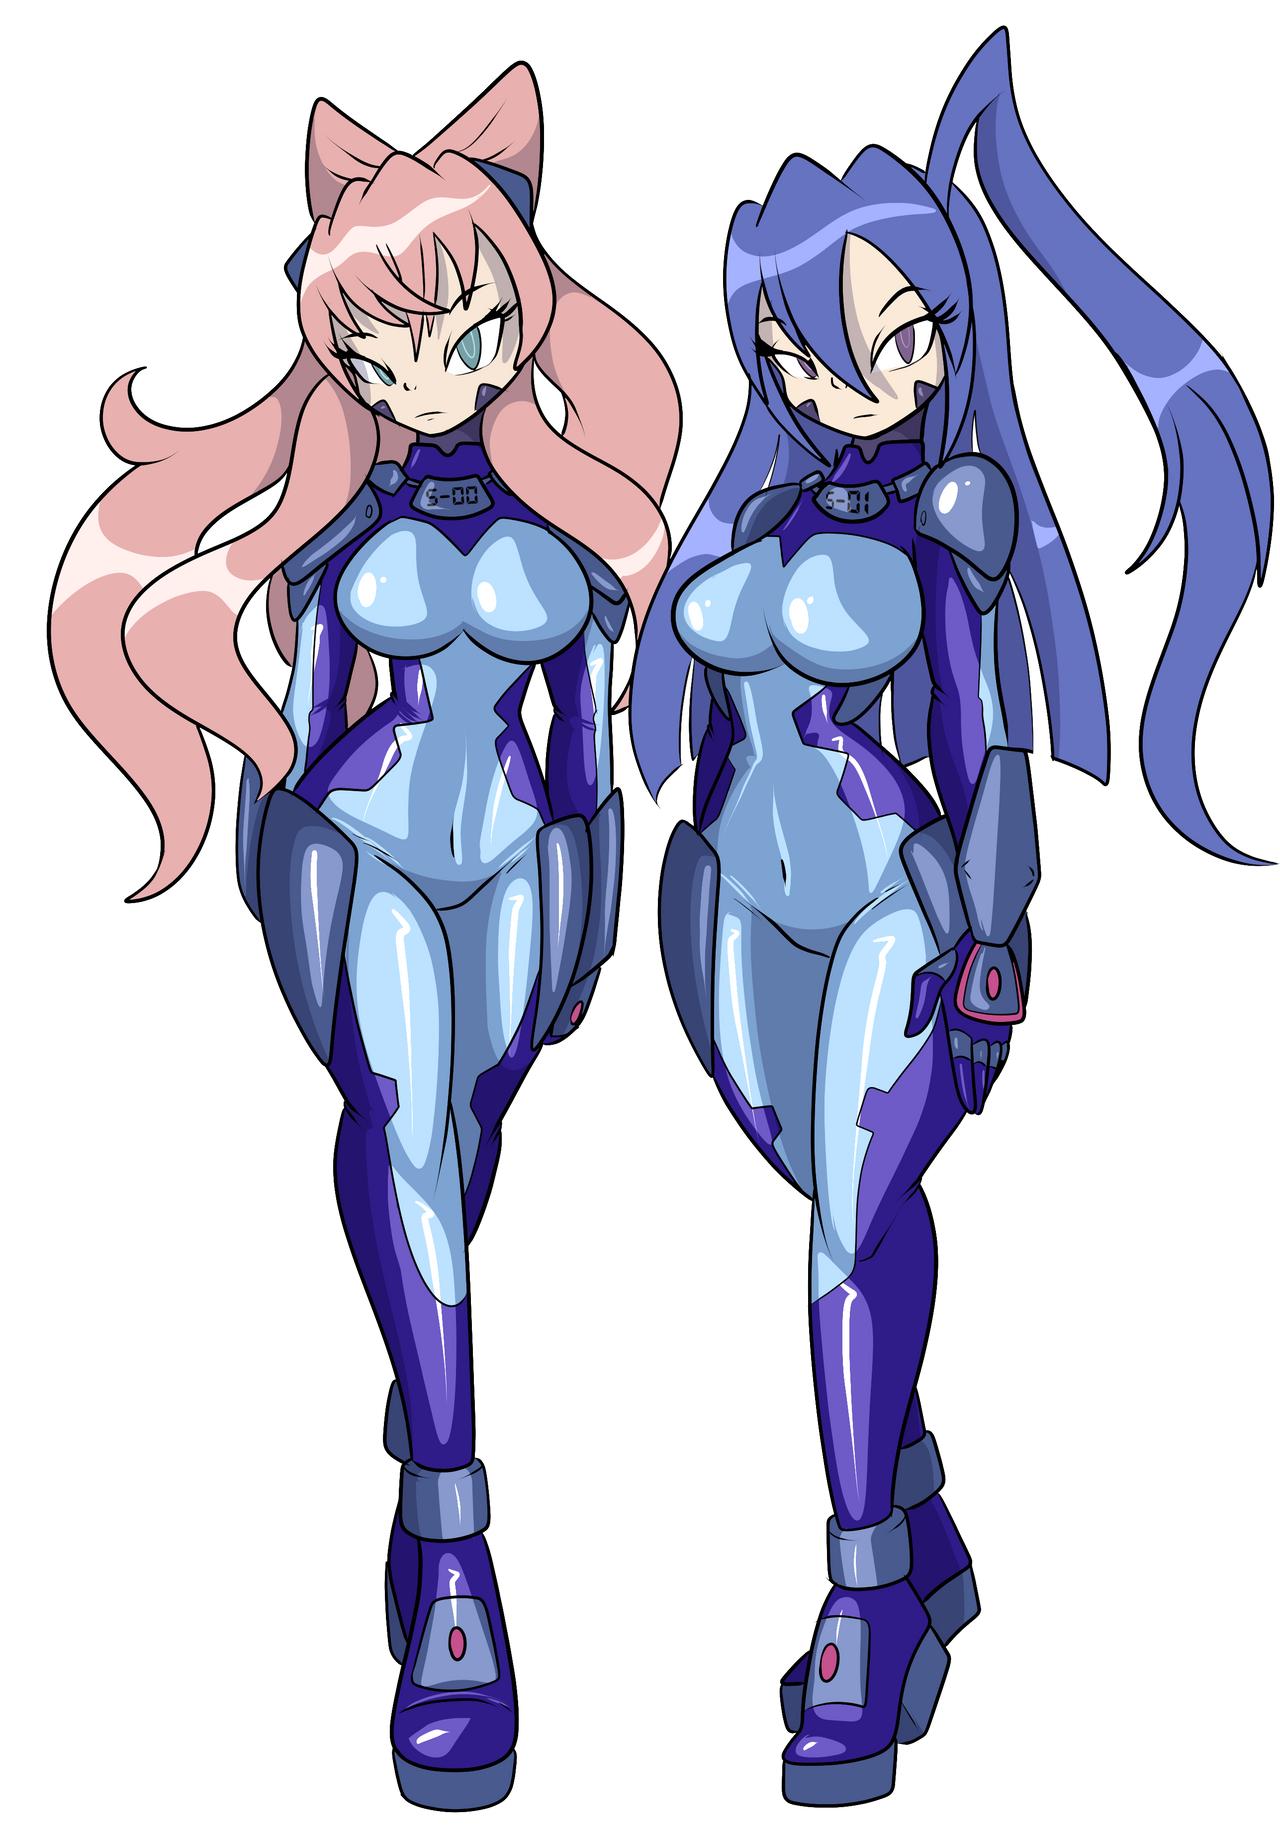 Combat Cyborgs S-00 and S-01 by ChaosOverlordZ on DeviantArt